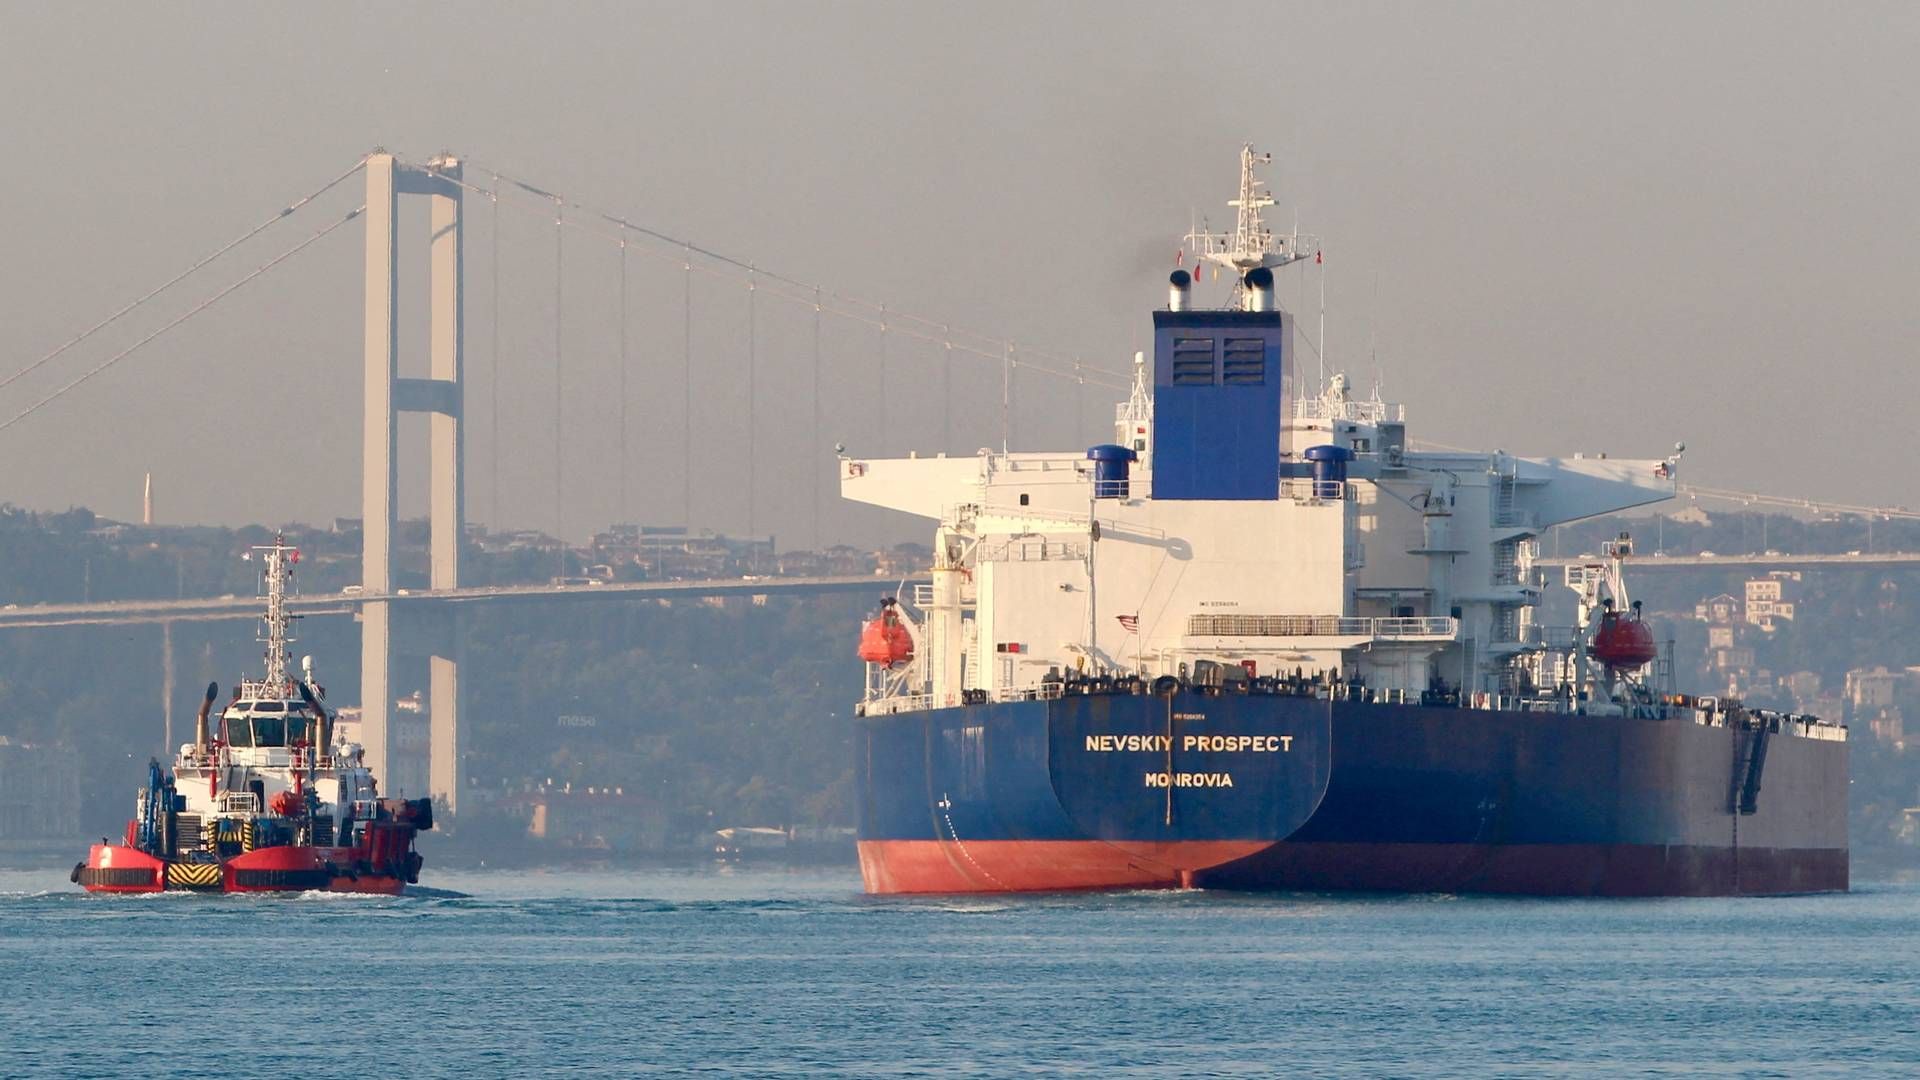 The crude oil tanker Nevskiy Prospect, owned by Russia's state-owned tanker company Sovcomflot, sails through the Bosphorus in Istanbul, Turkey, in 2020.